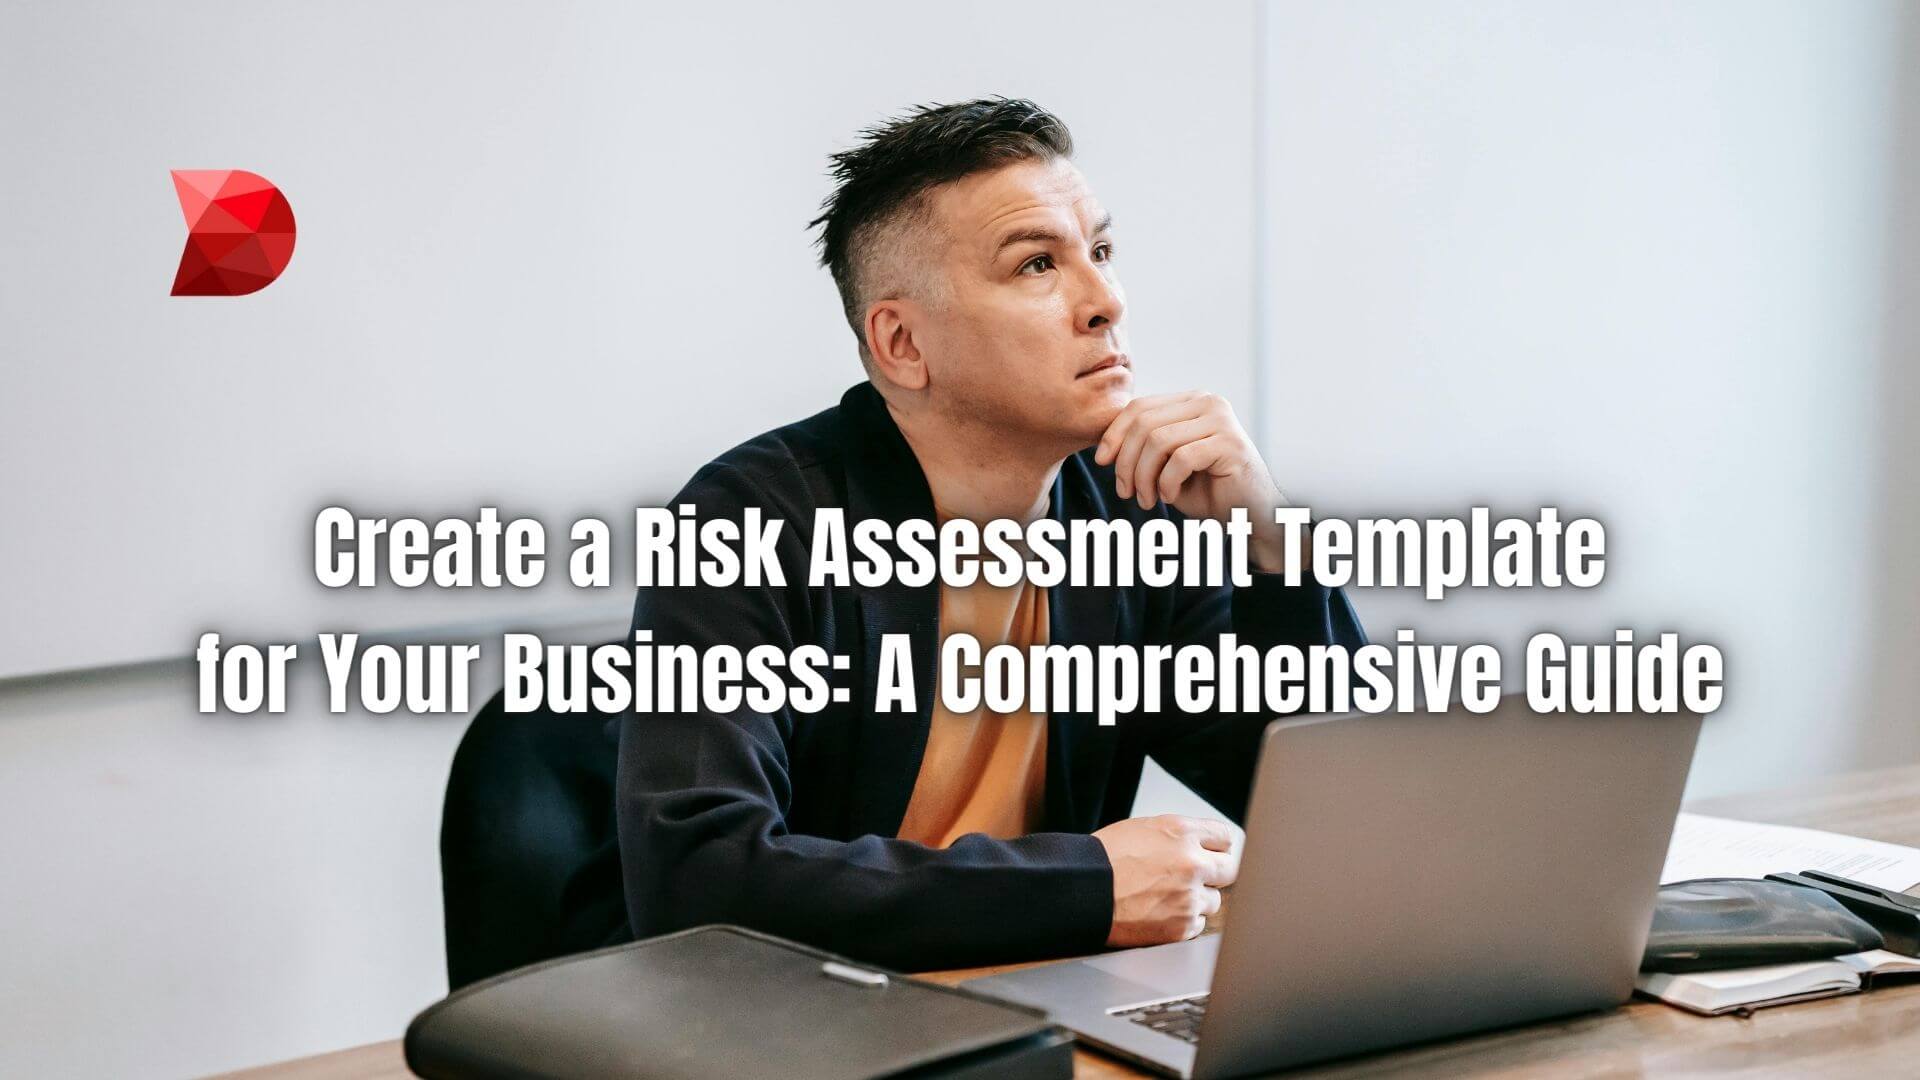 Navigate the complexities of risk management effortlessly. Learn how to develop a tailored risk assessment template for your business.